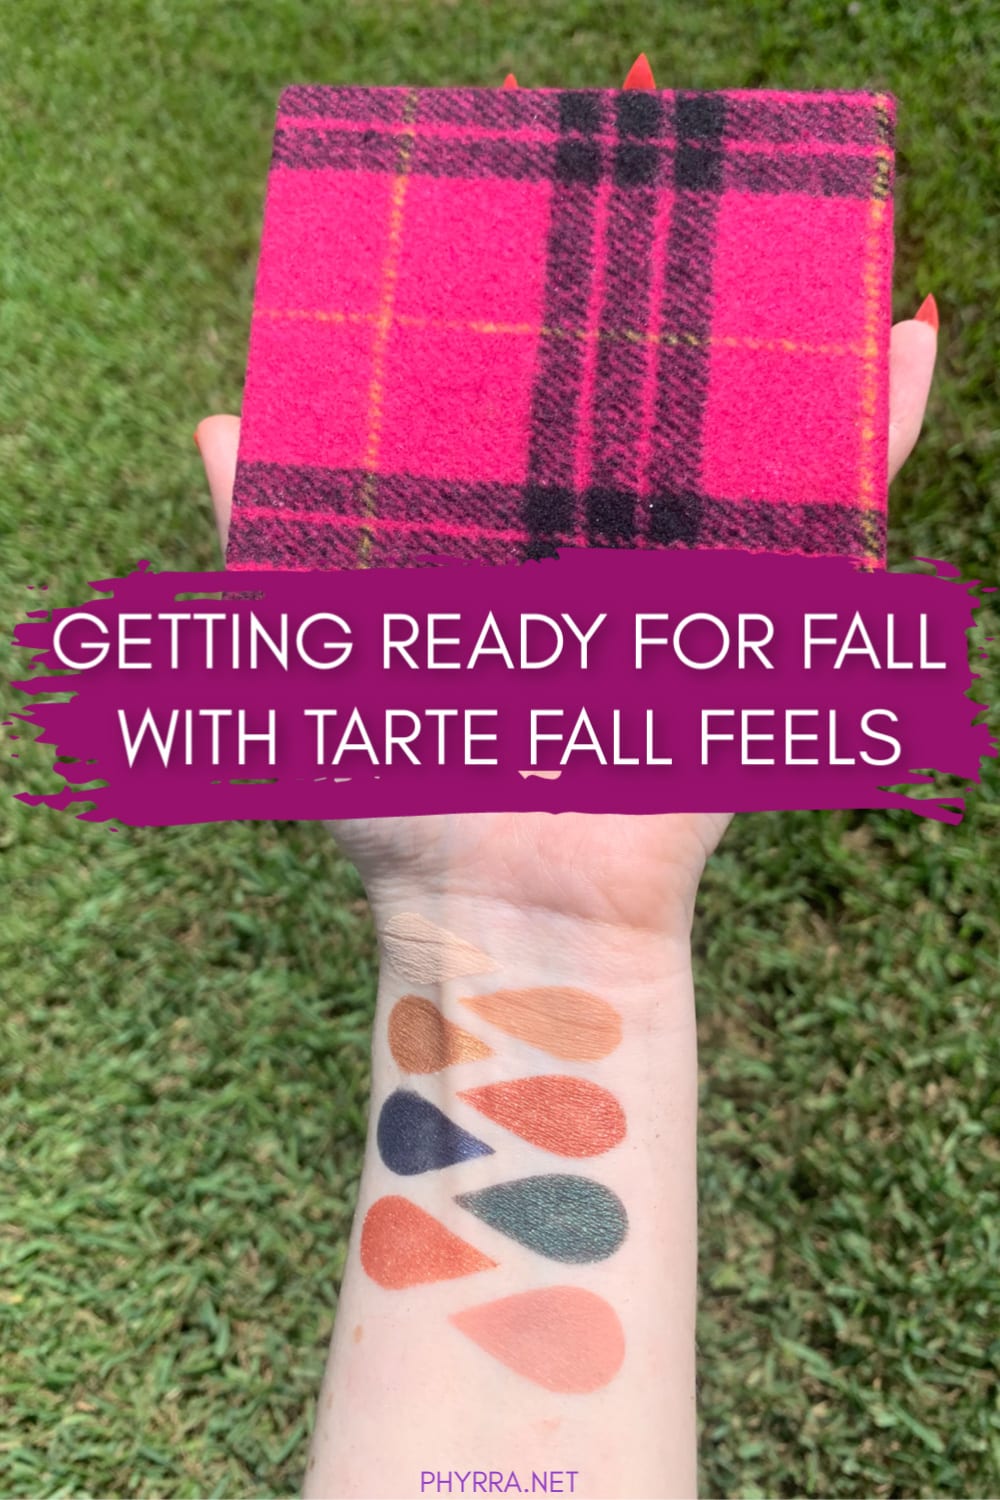 Getting Ready for Fall with the Tarte Fall Feels Palette